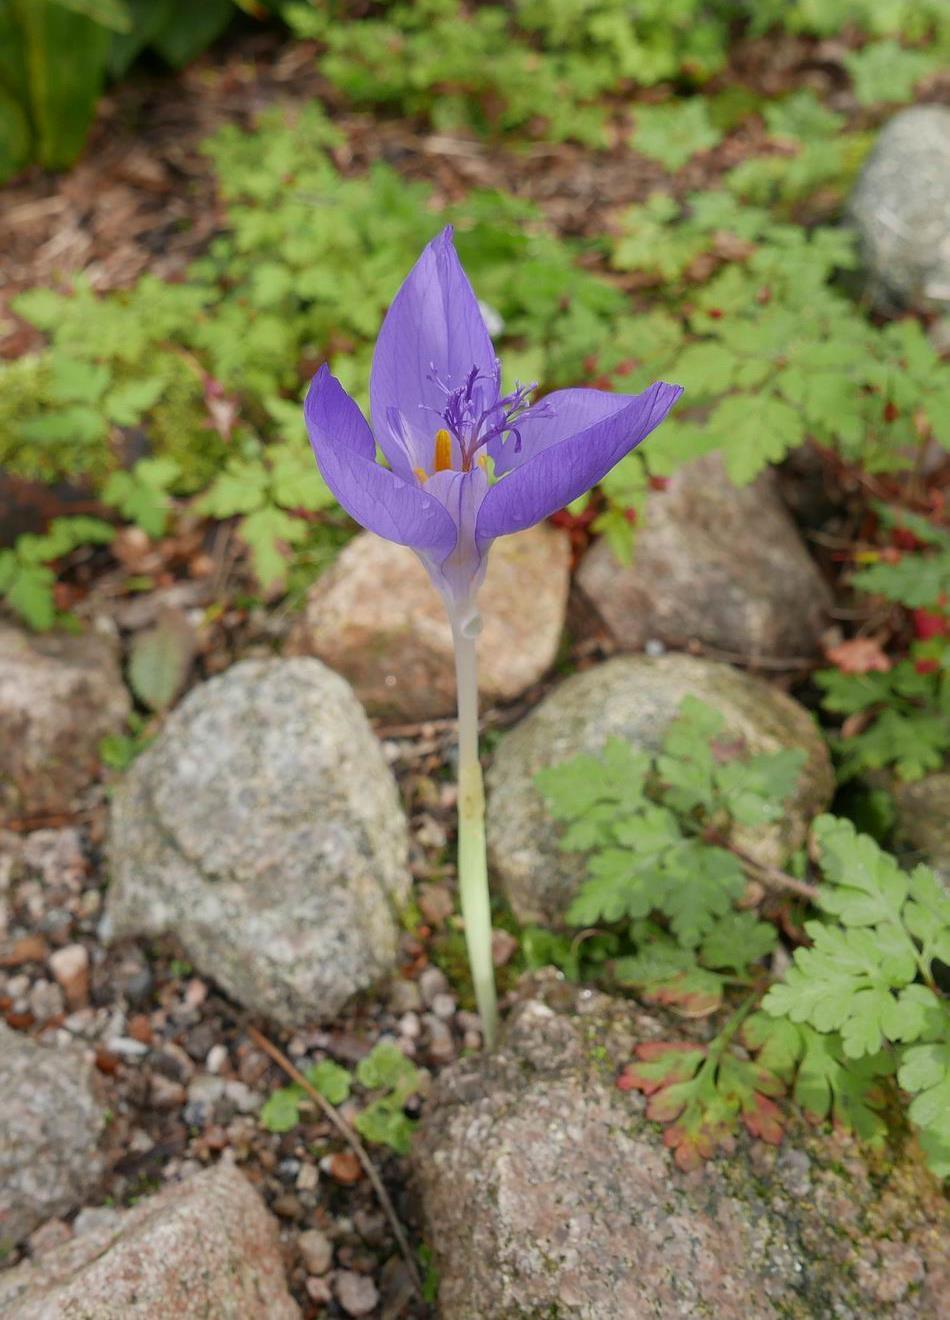 One of the survivors in the sand bed that was not eaten by the mice is this Crocus banaticus now